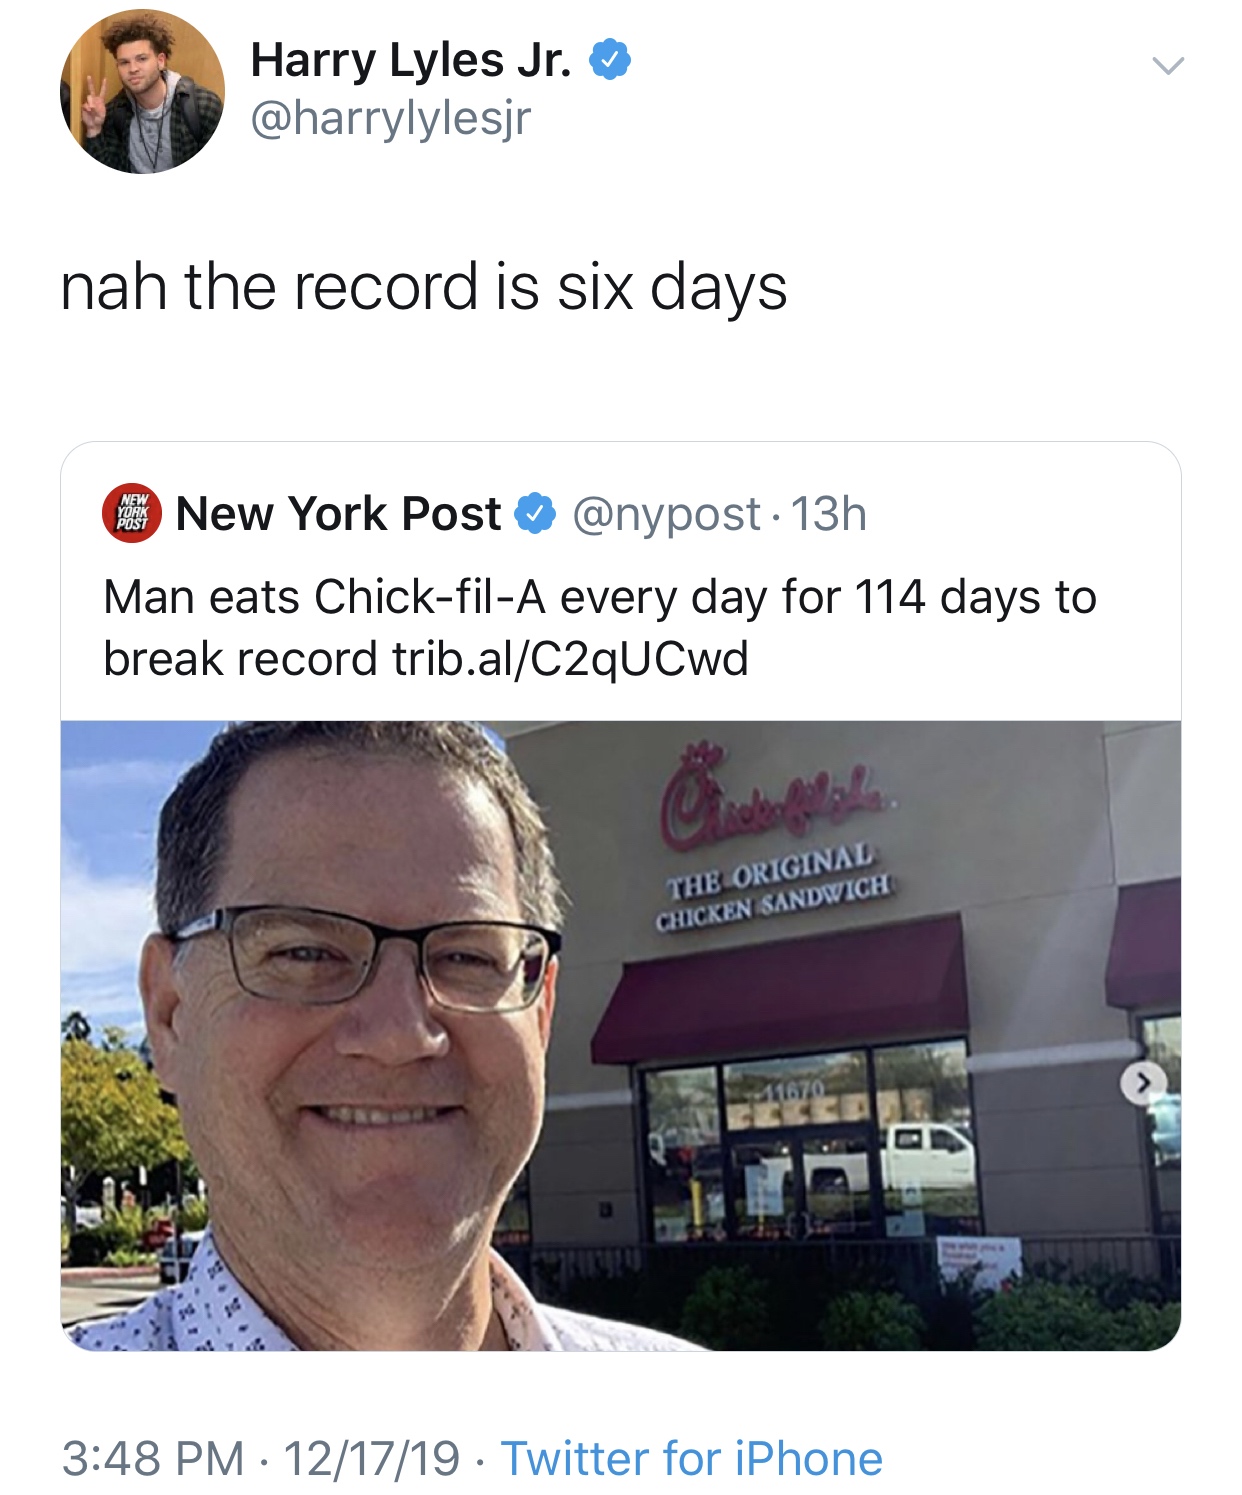 media - Harry Lyles Jr. nah the record is six days New York Post 13h Man eats ChickfilA every day for 114 days to break record trib.alC2qUCwd The Original Chicken Sandwich 121719 Twitter for iPhone